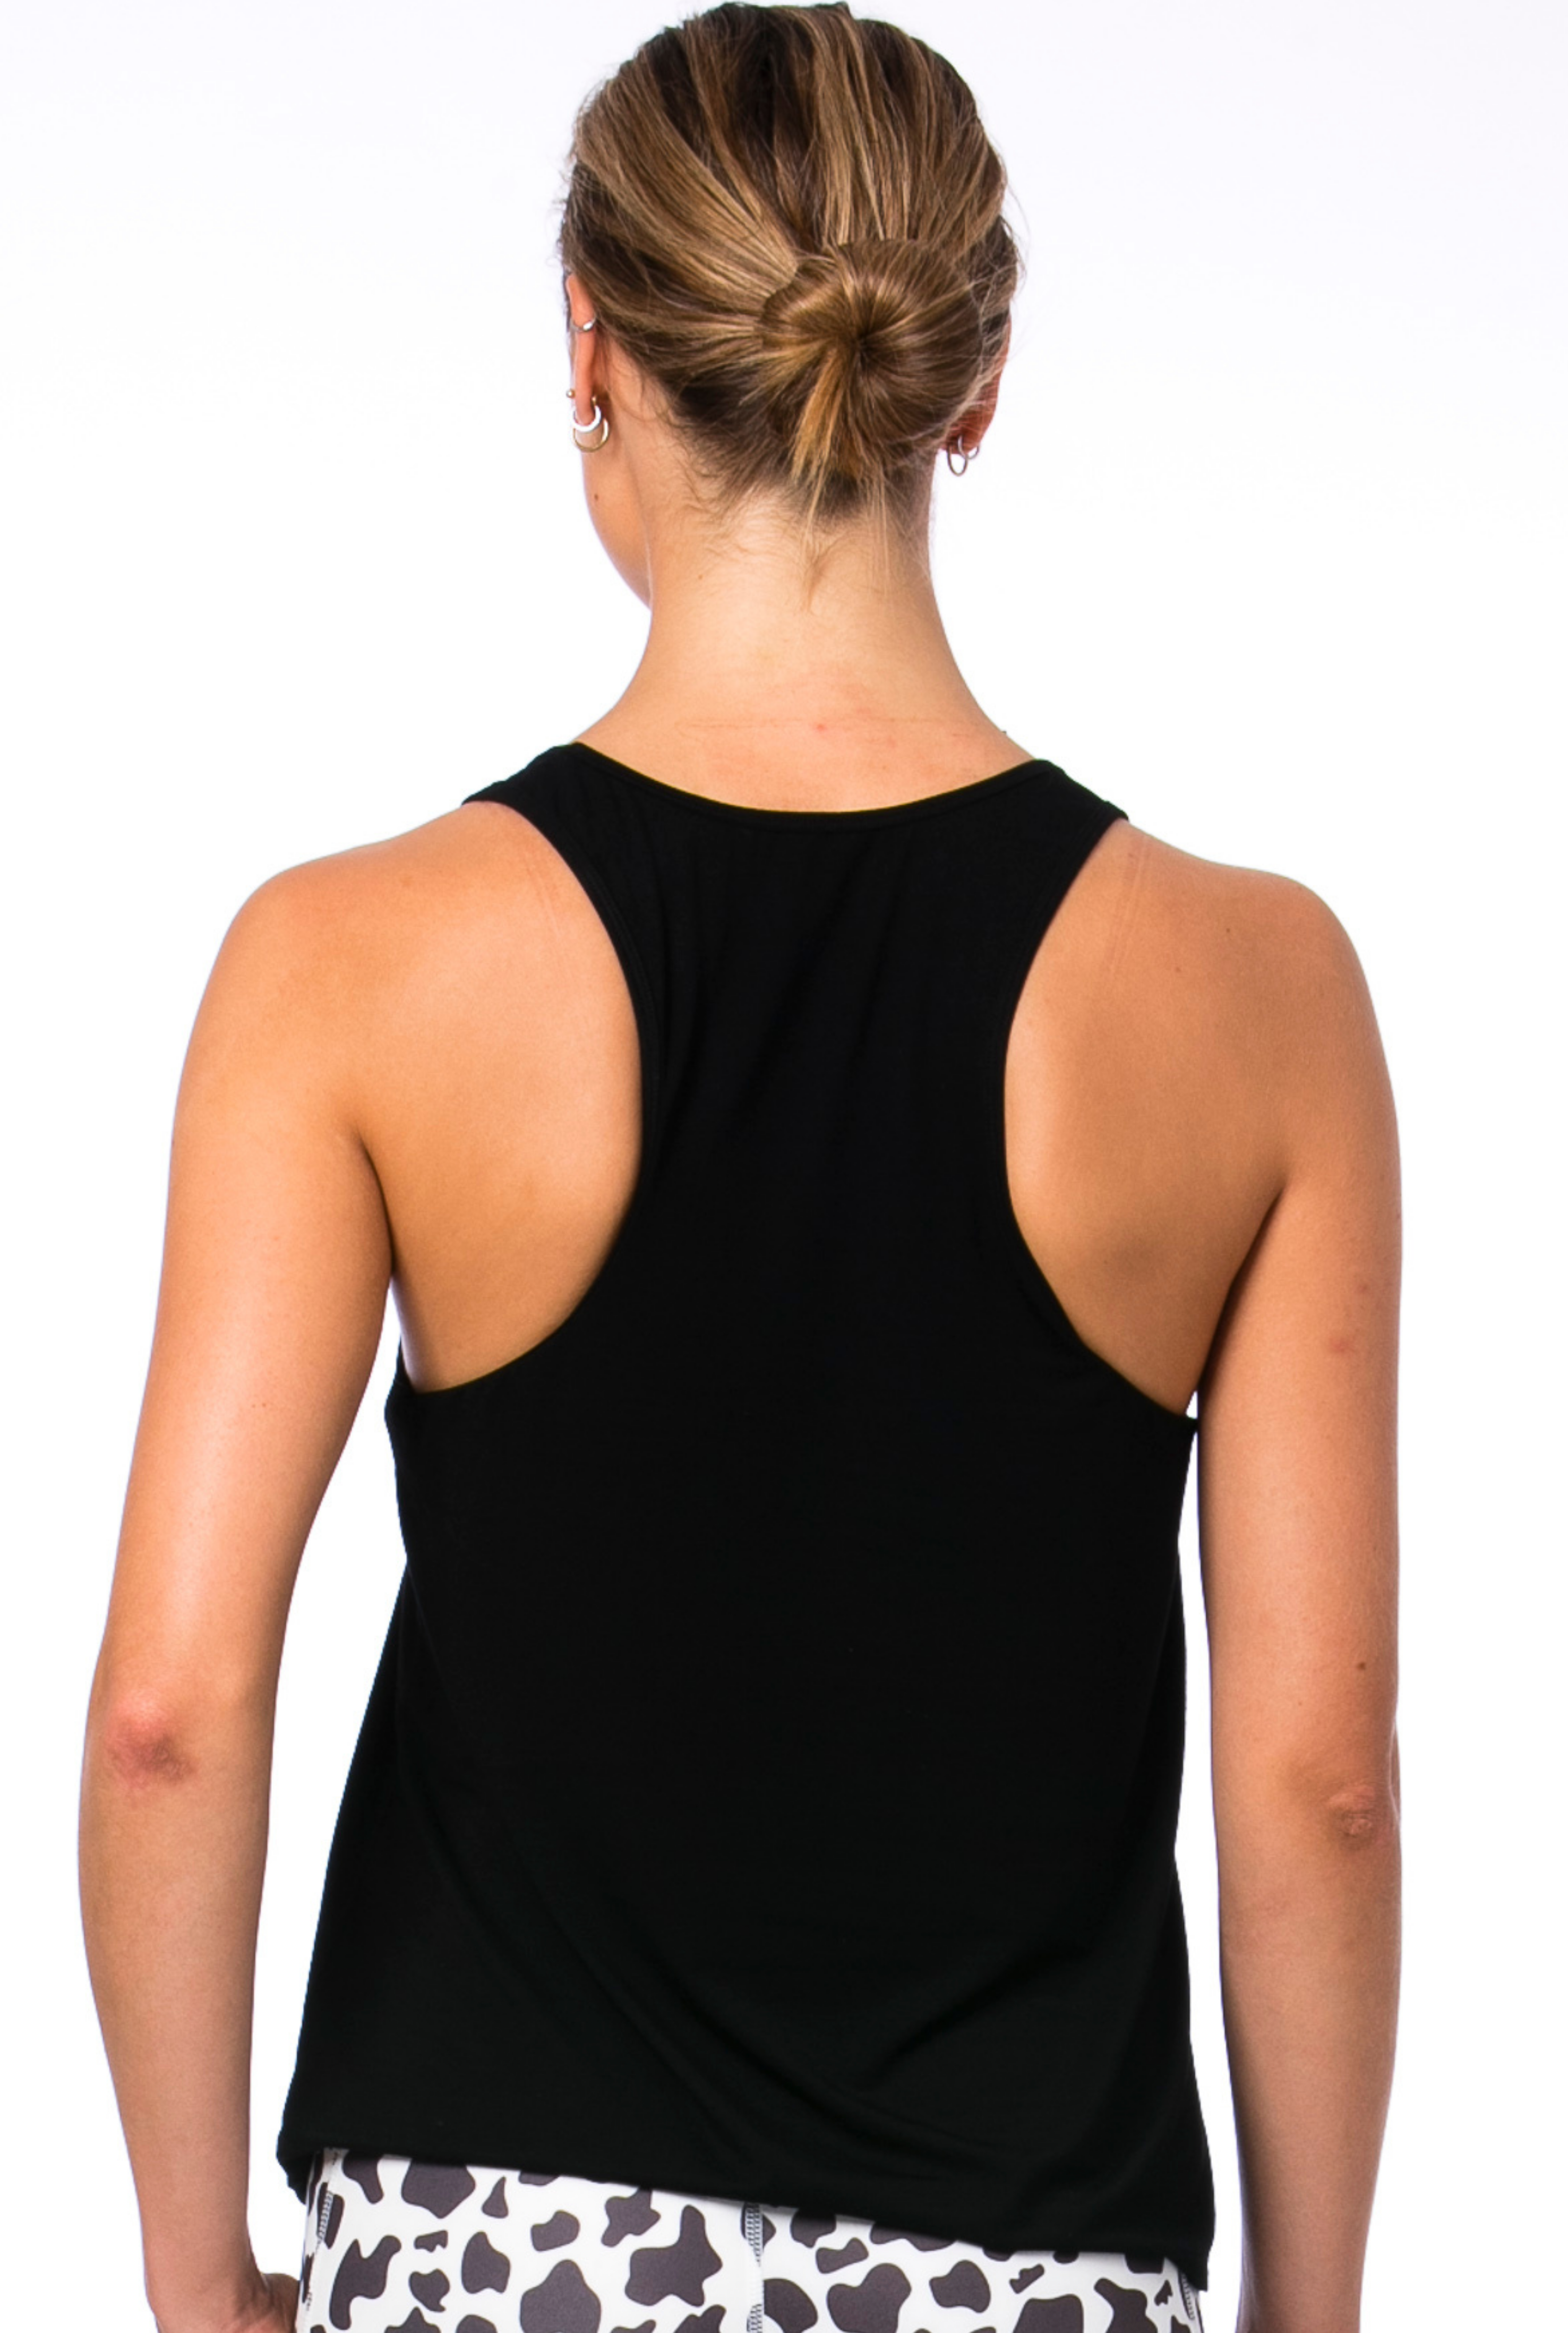 Trendy & Bendy Ashtanga Tank has a flattering round neckline and is designed to compliment your waistline. It is a long length tank with a racer back, made with modal fabric and is a super soft, buttery fabric. It is lightweight, breathable, stylish and versatile.